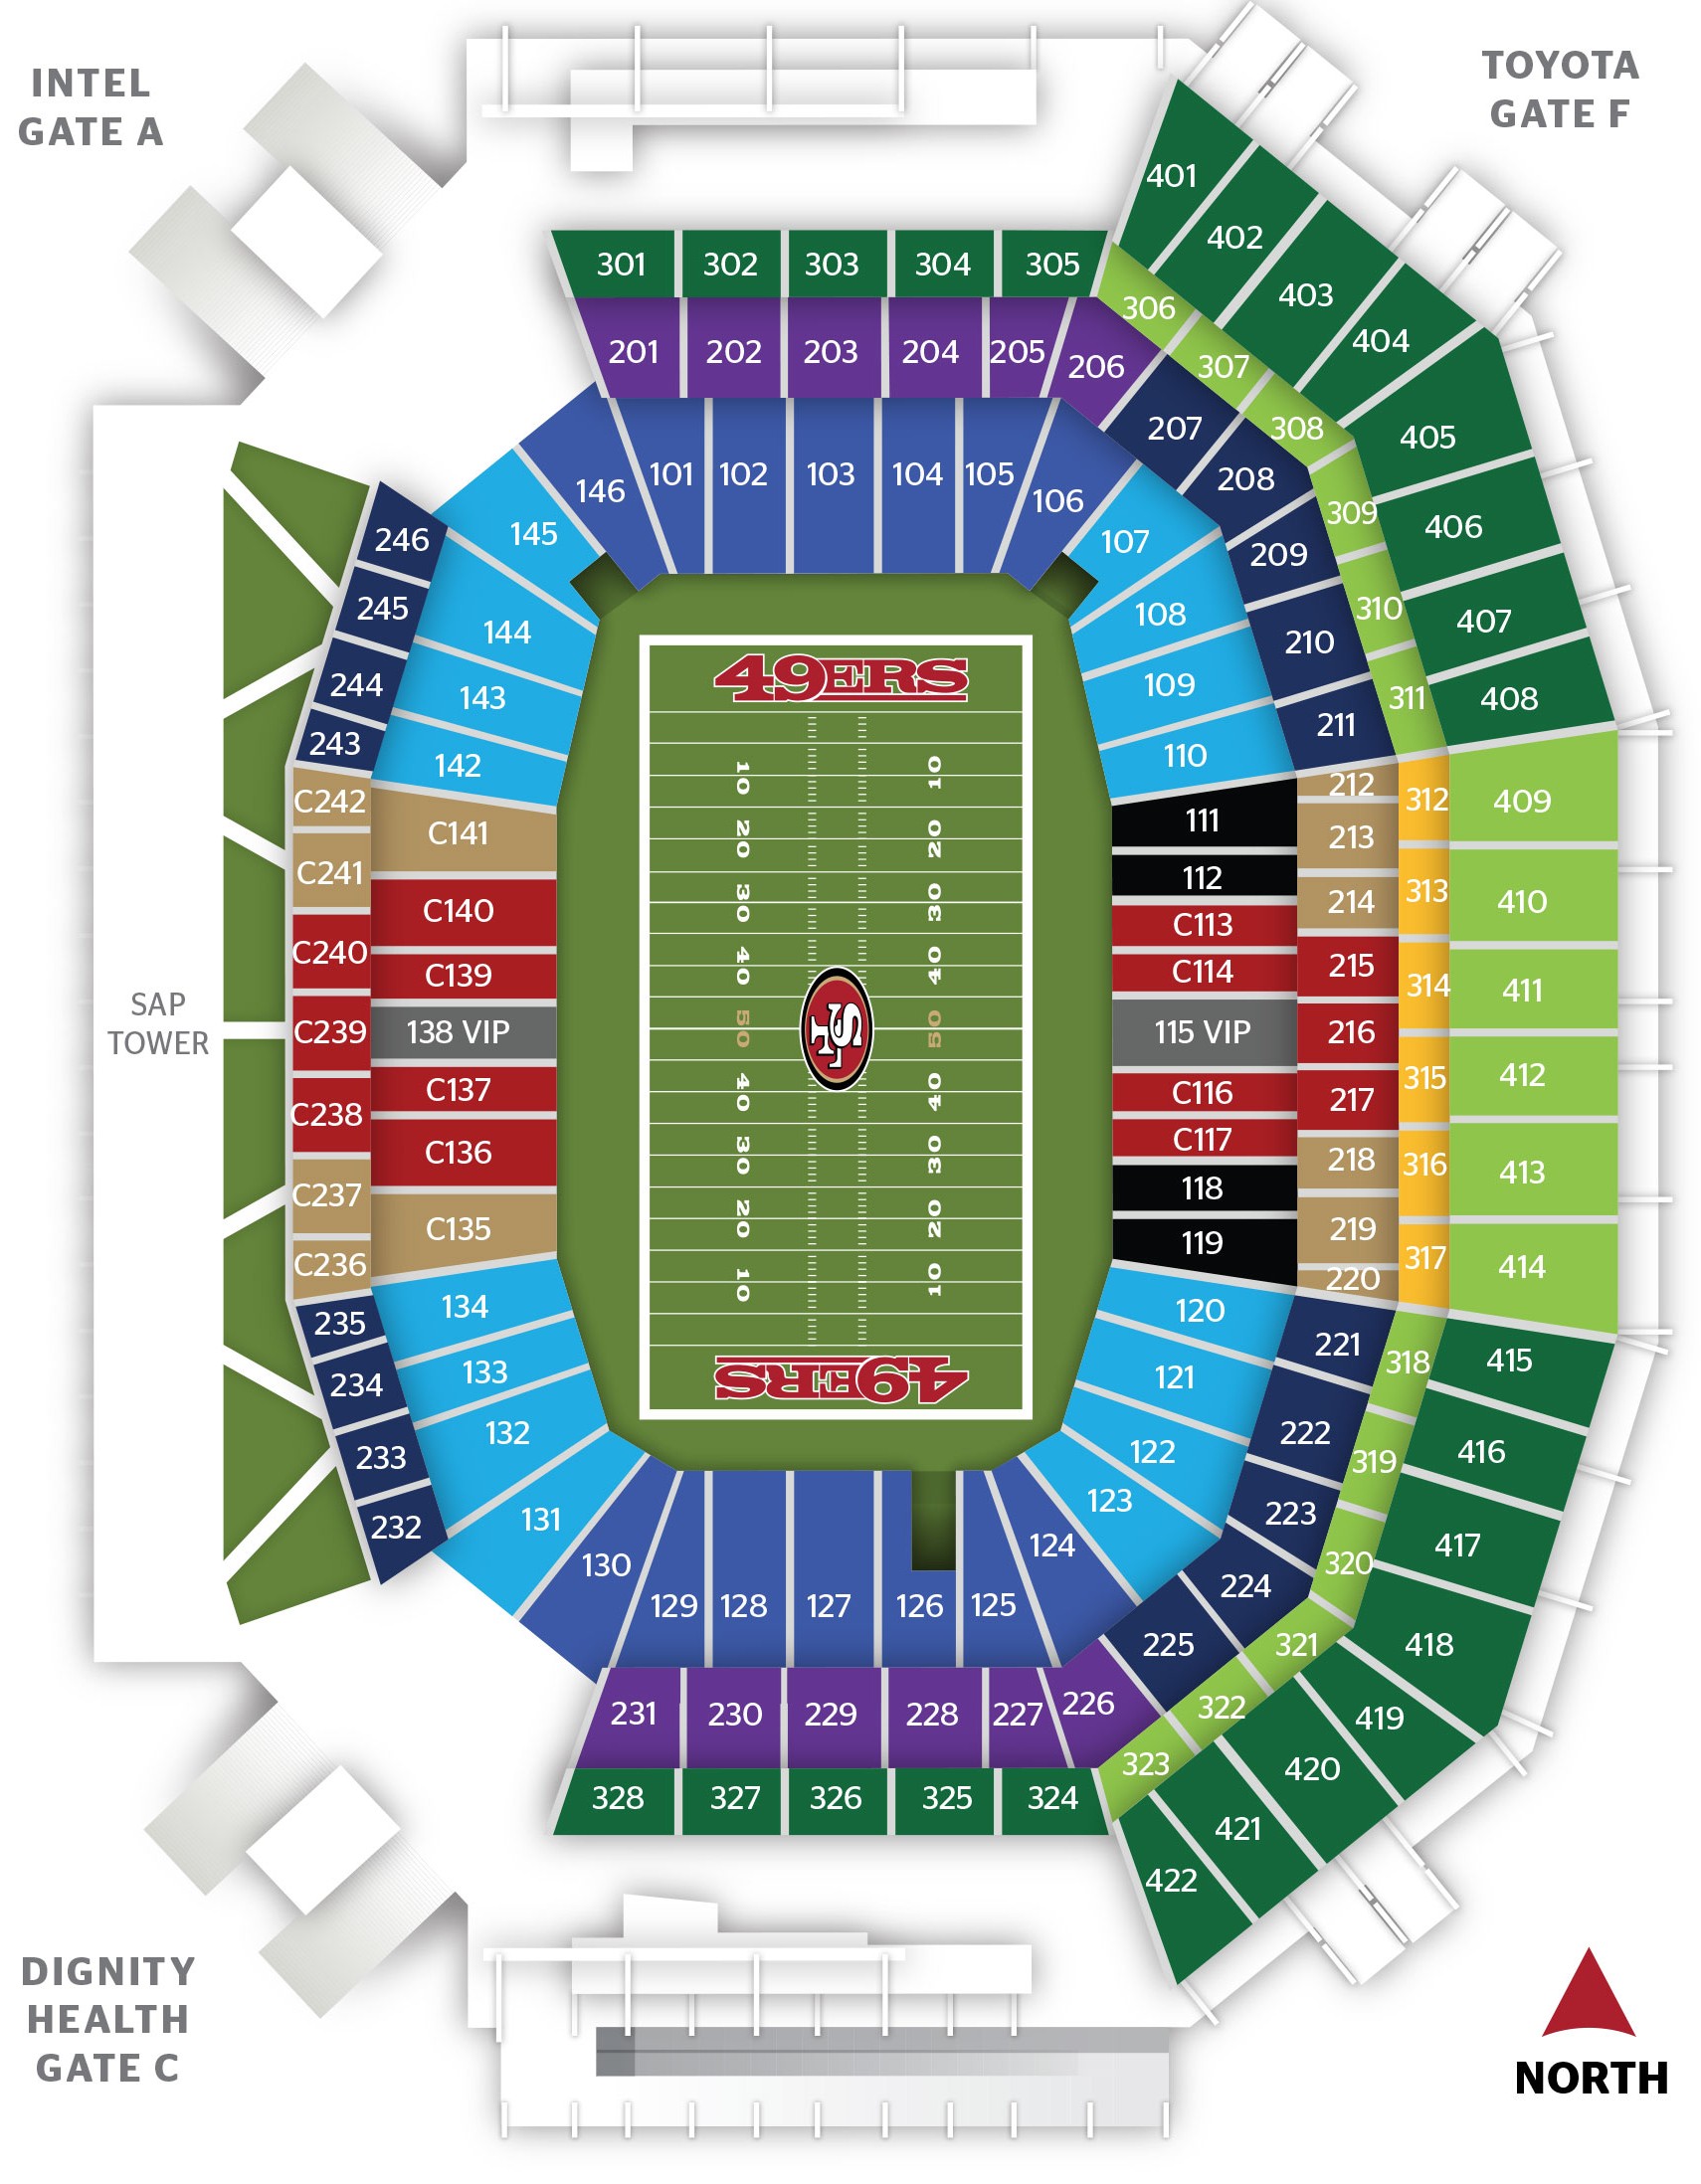 season tickets for the 49ers